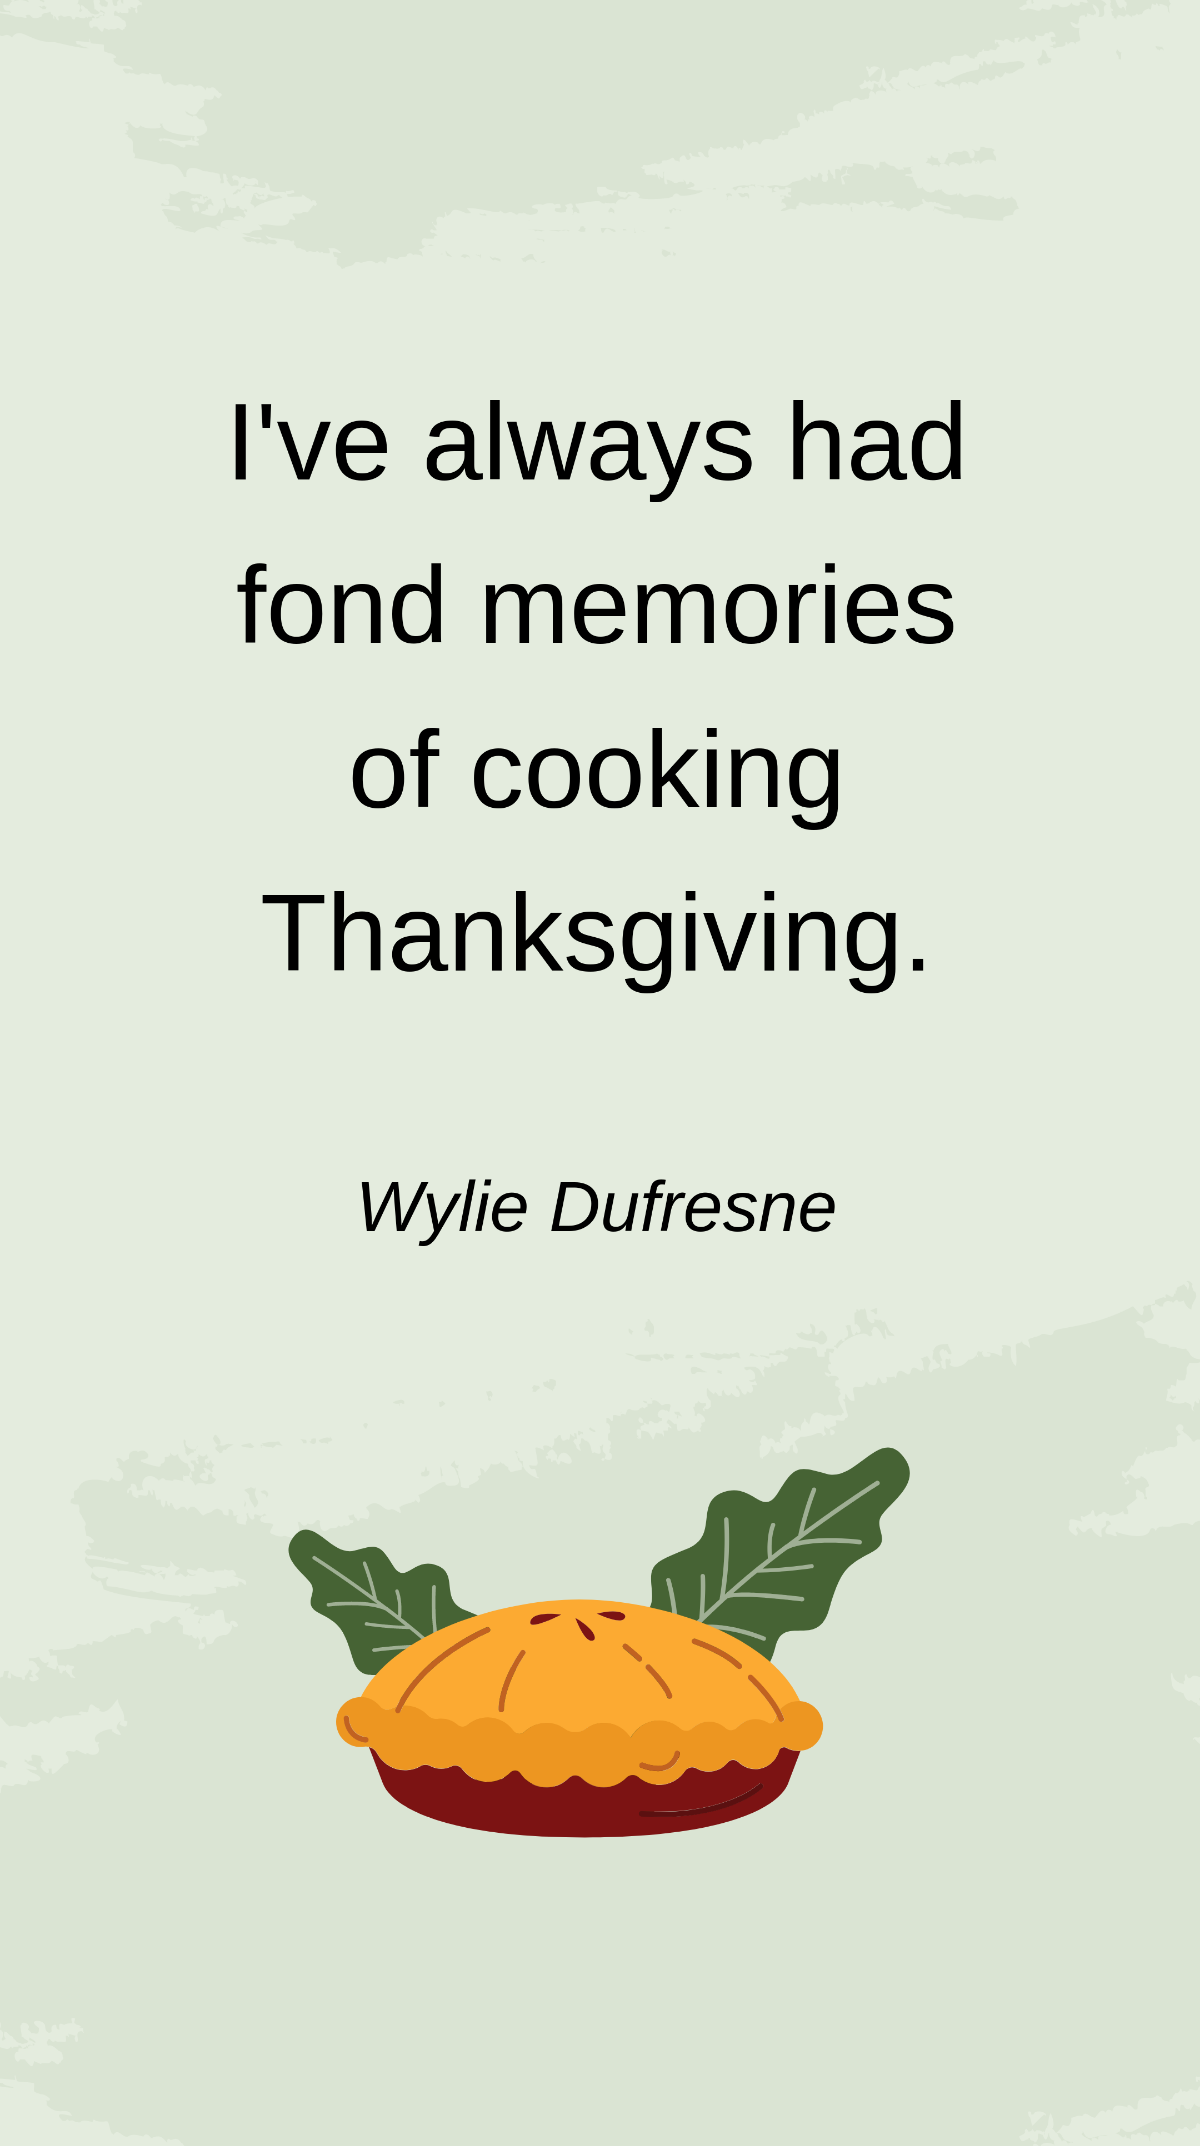 Wylie Dufresne - I've always had fond memories of cooking Thanksgiving. Template